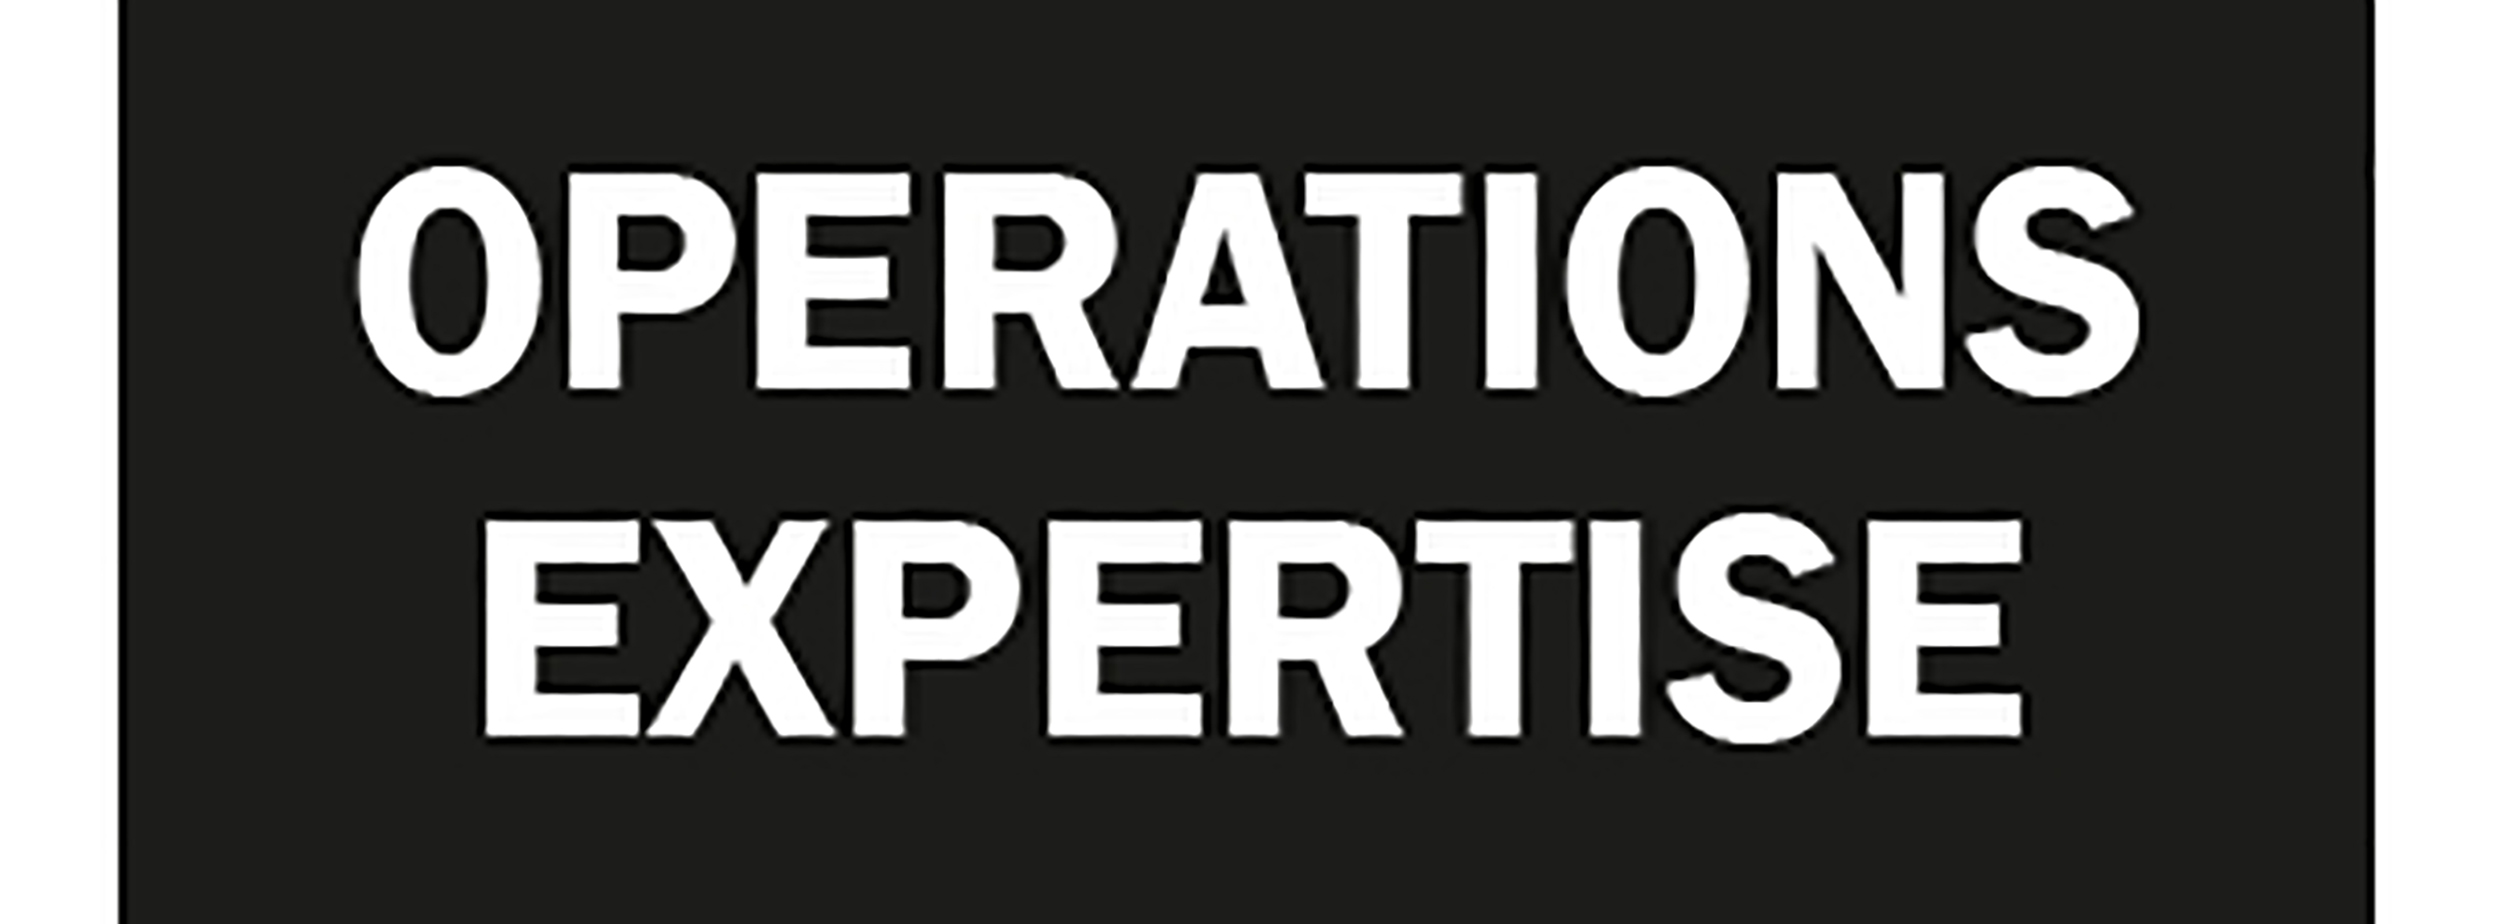 Operations Expertise BUTTON.jpg